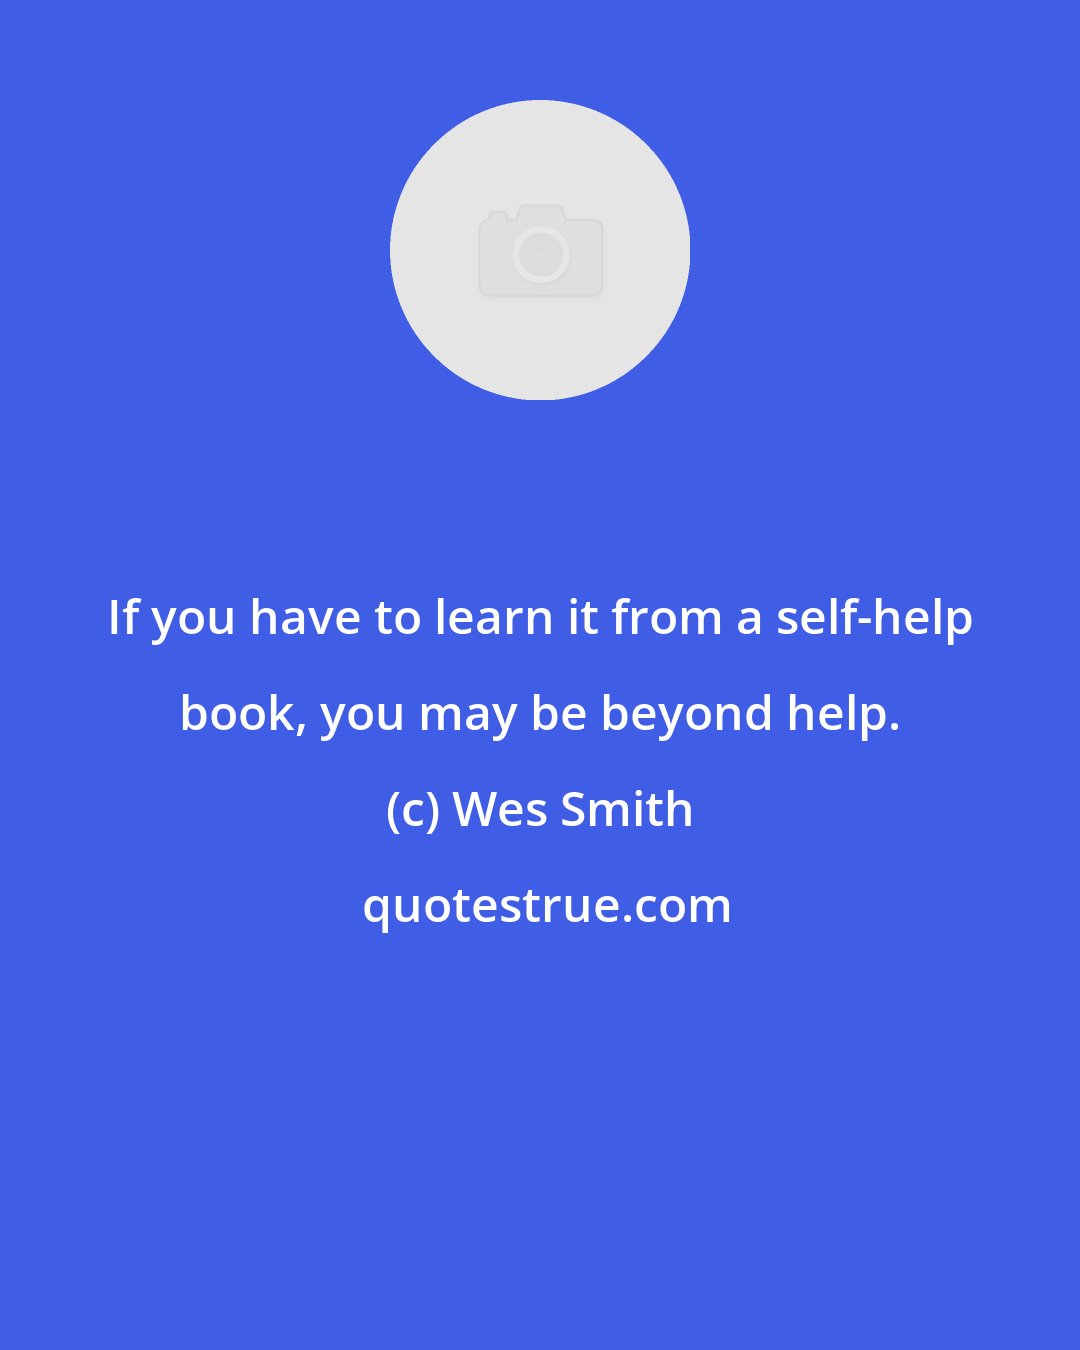 Wes Smith: If you have to learn it from a self-help book, you may be beyond help.